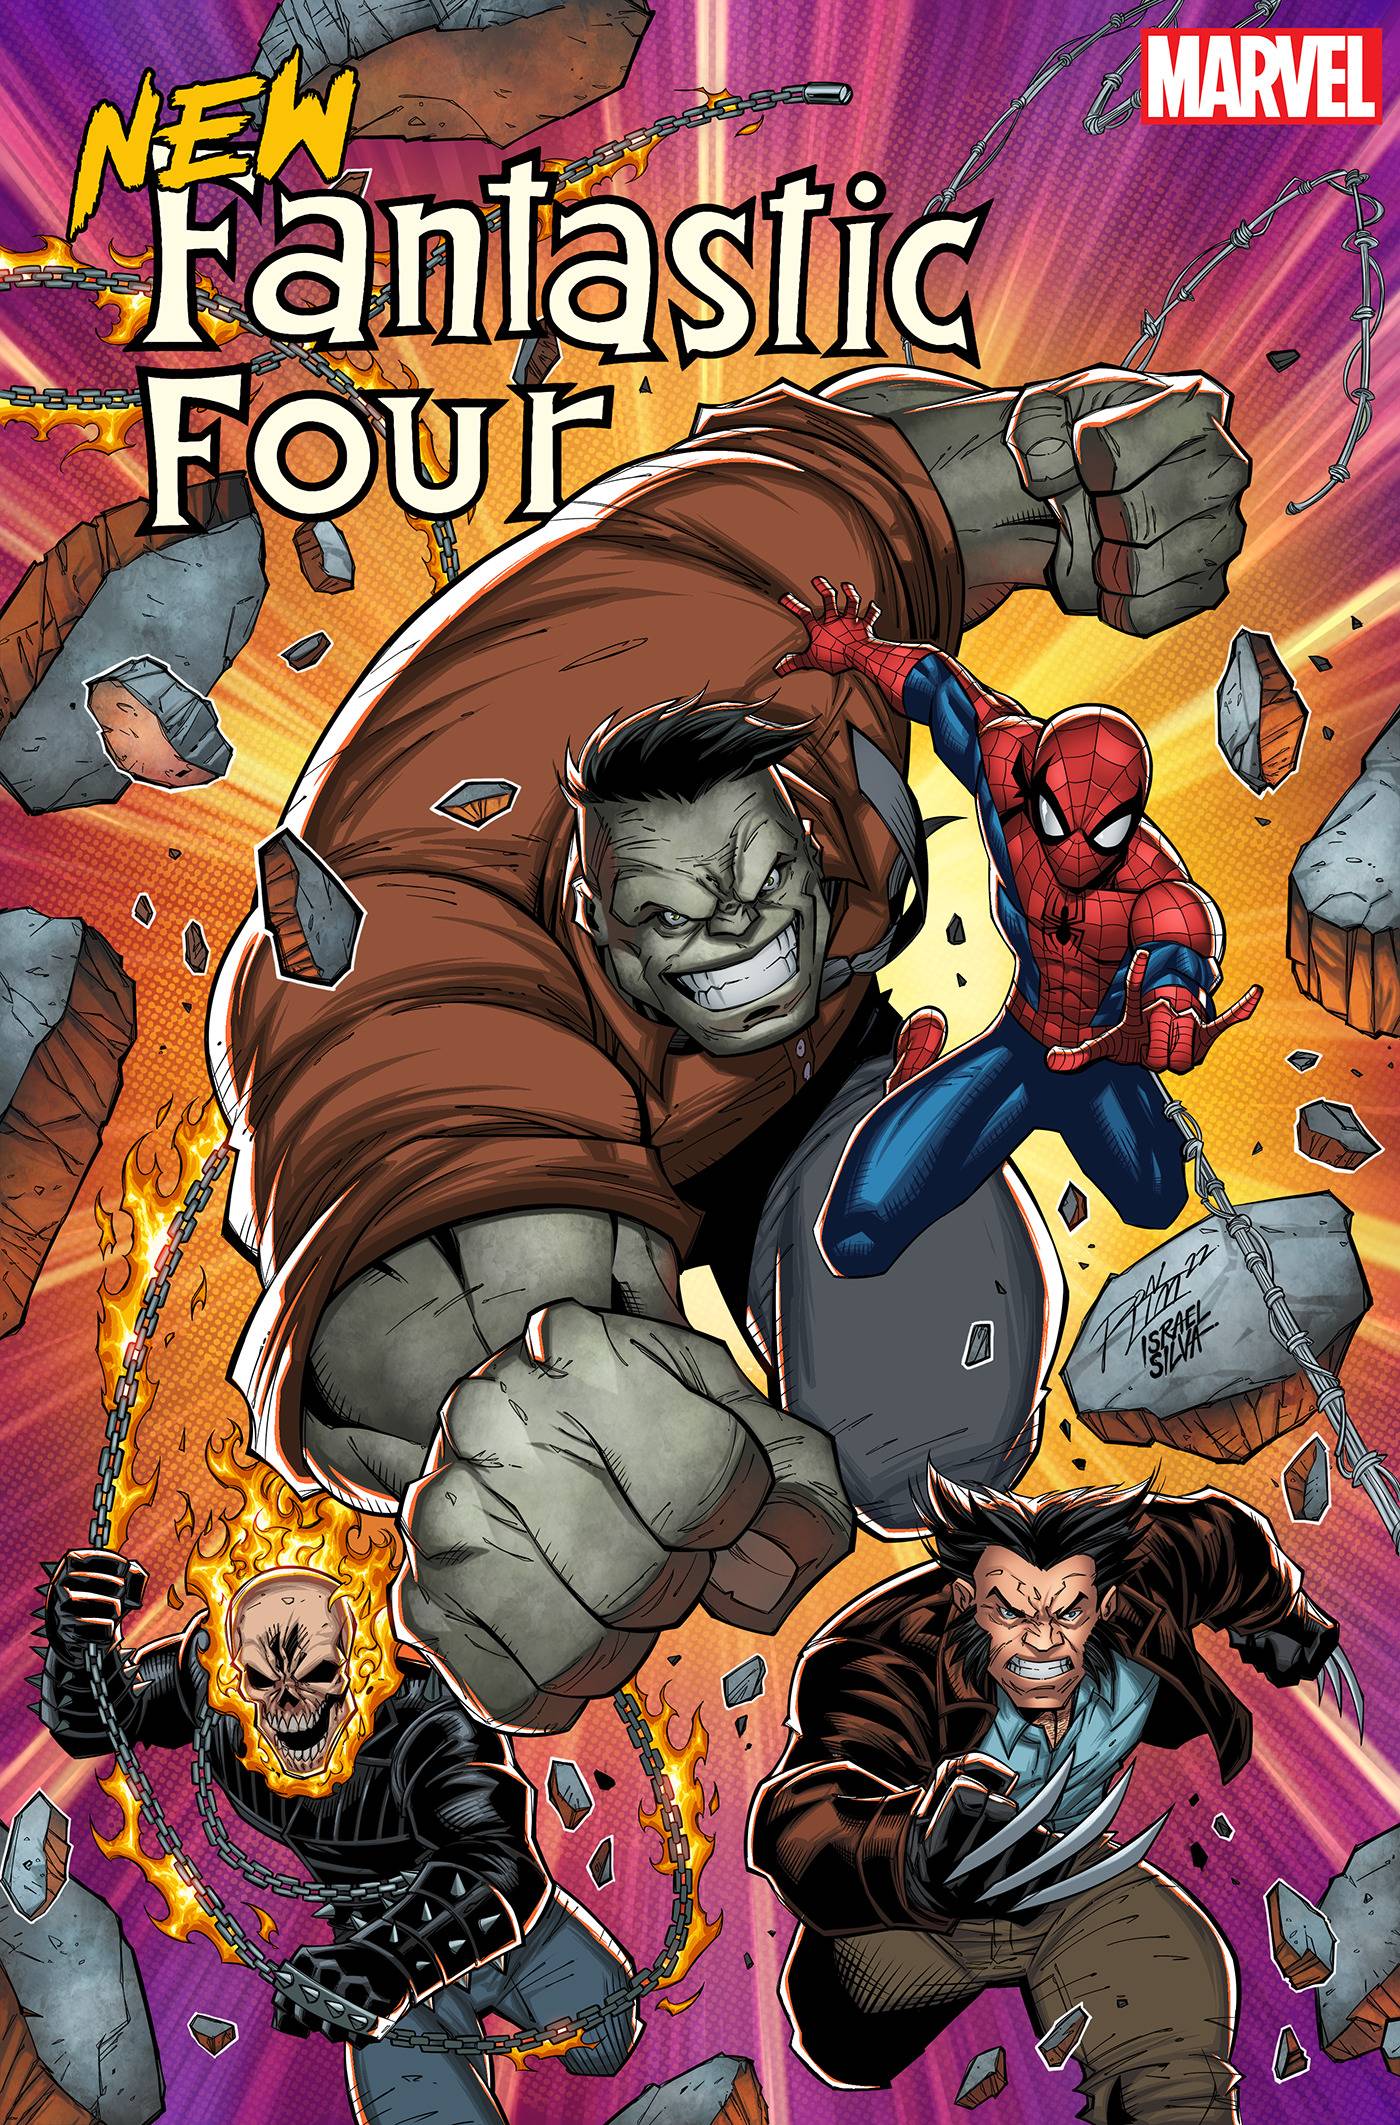 06/22/2022 NEW FANTASTIC FOUR #1 (OF 5) RON LIM VARIANT